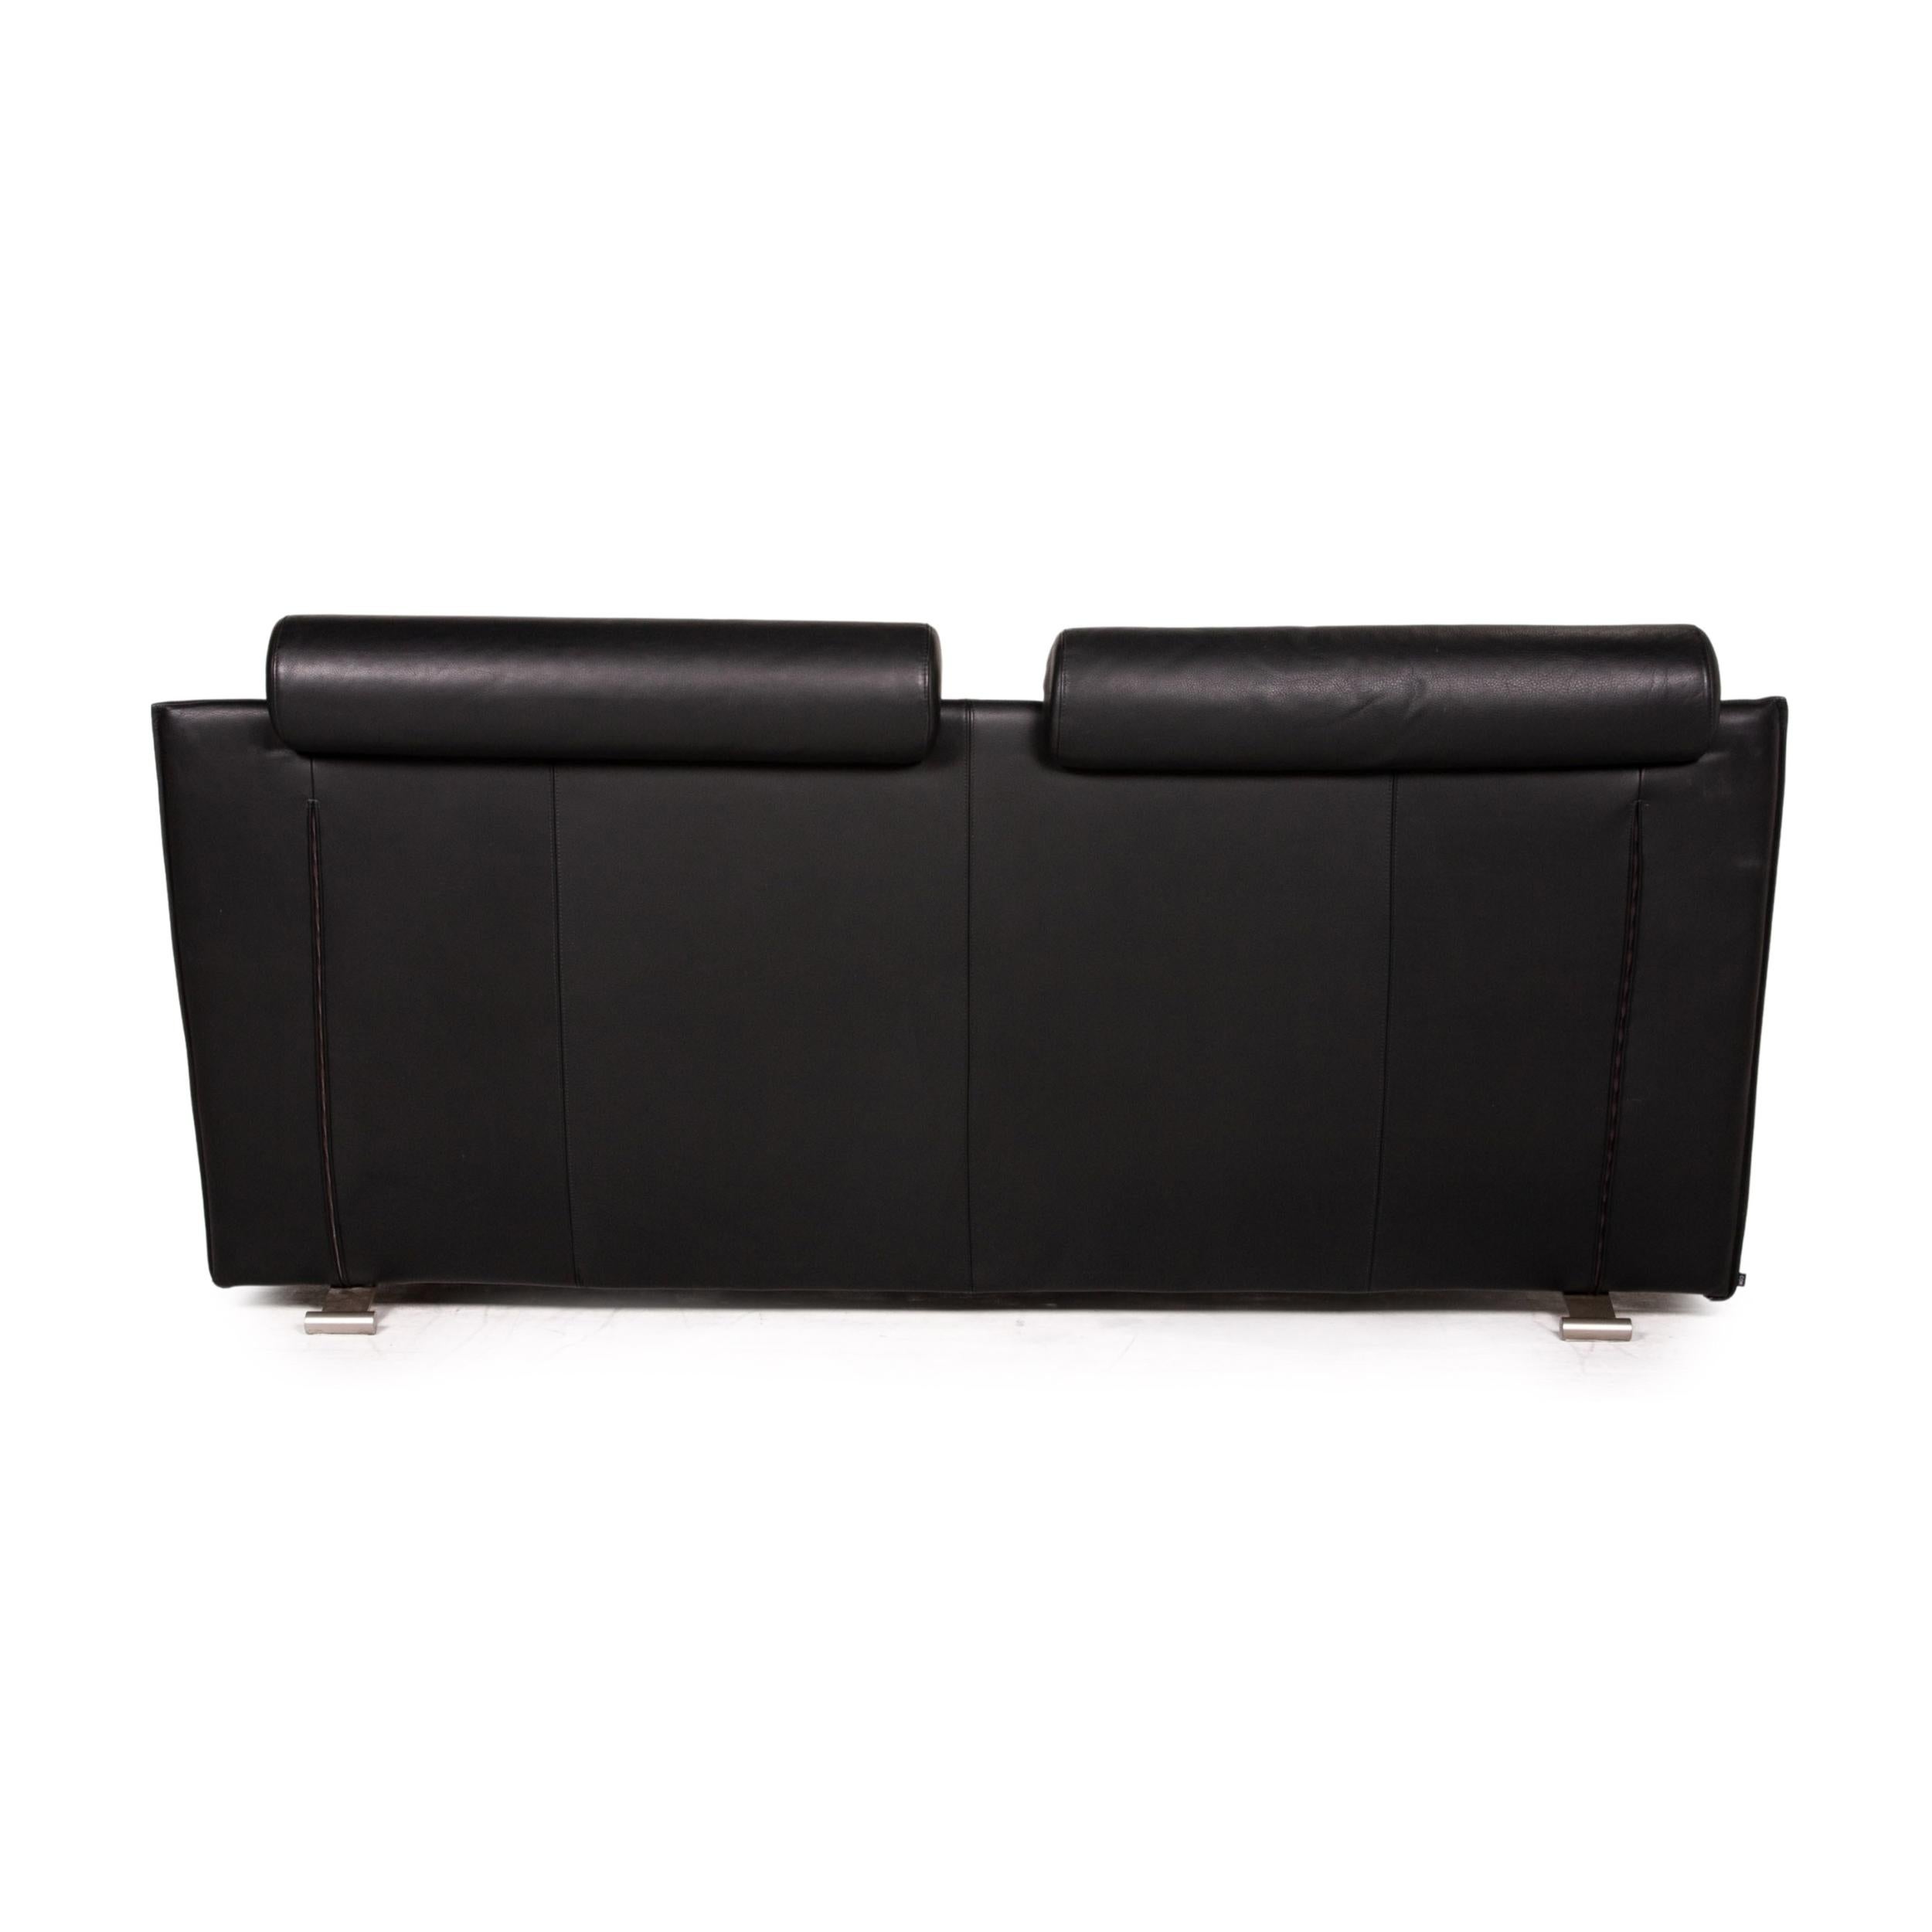 COR Sera Leather Sofa Black Two-Seater Function Couch For Sale 5